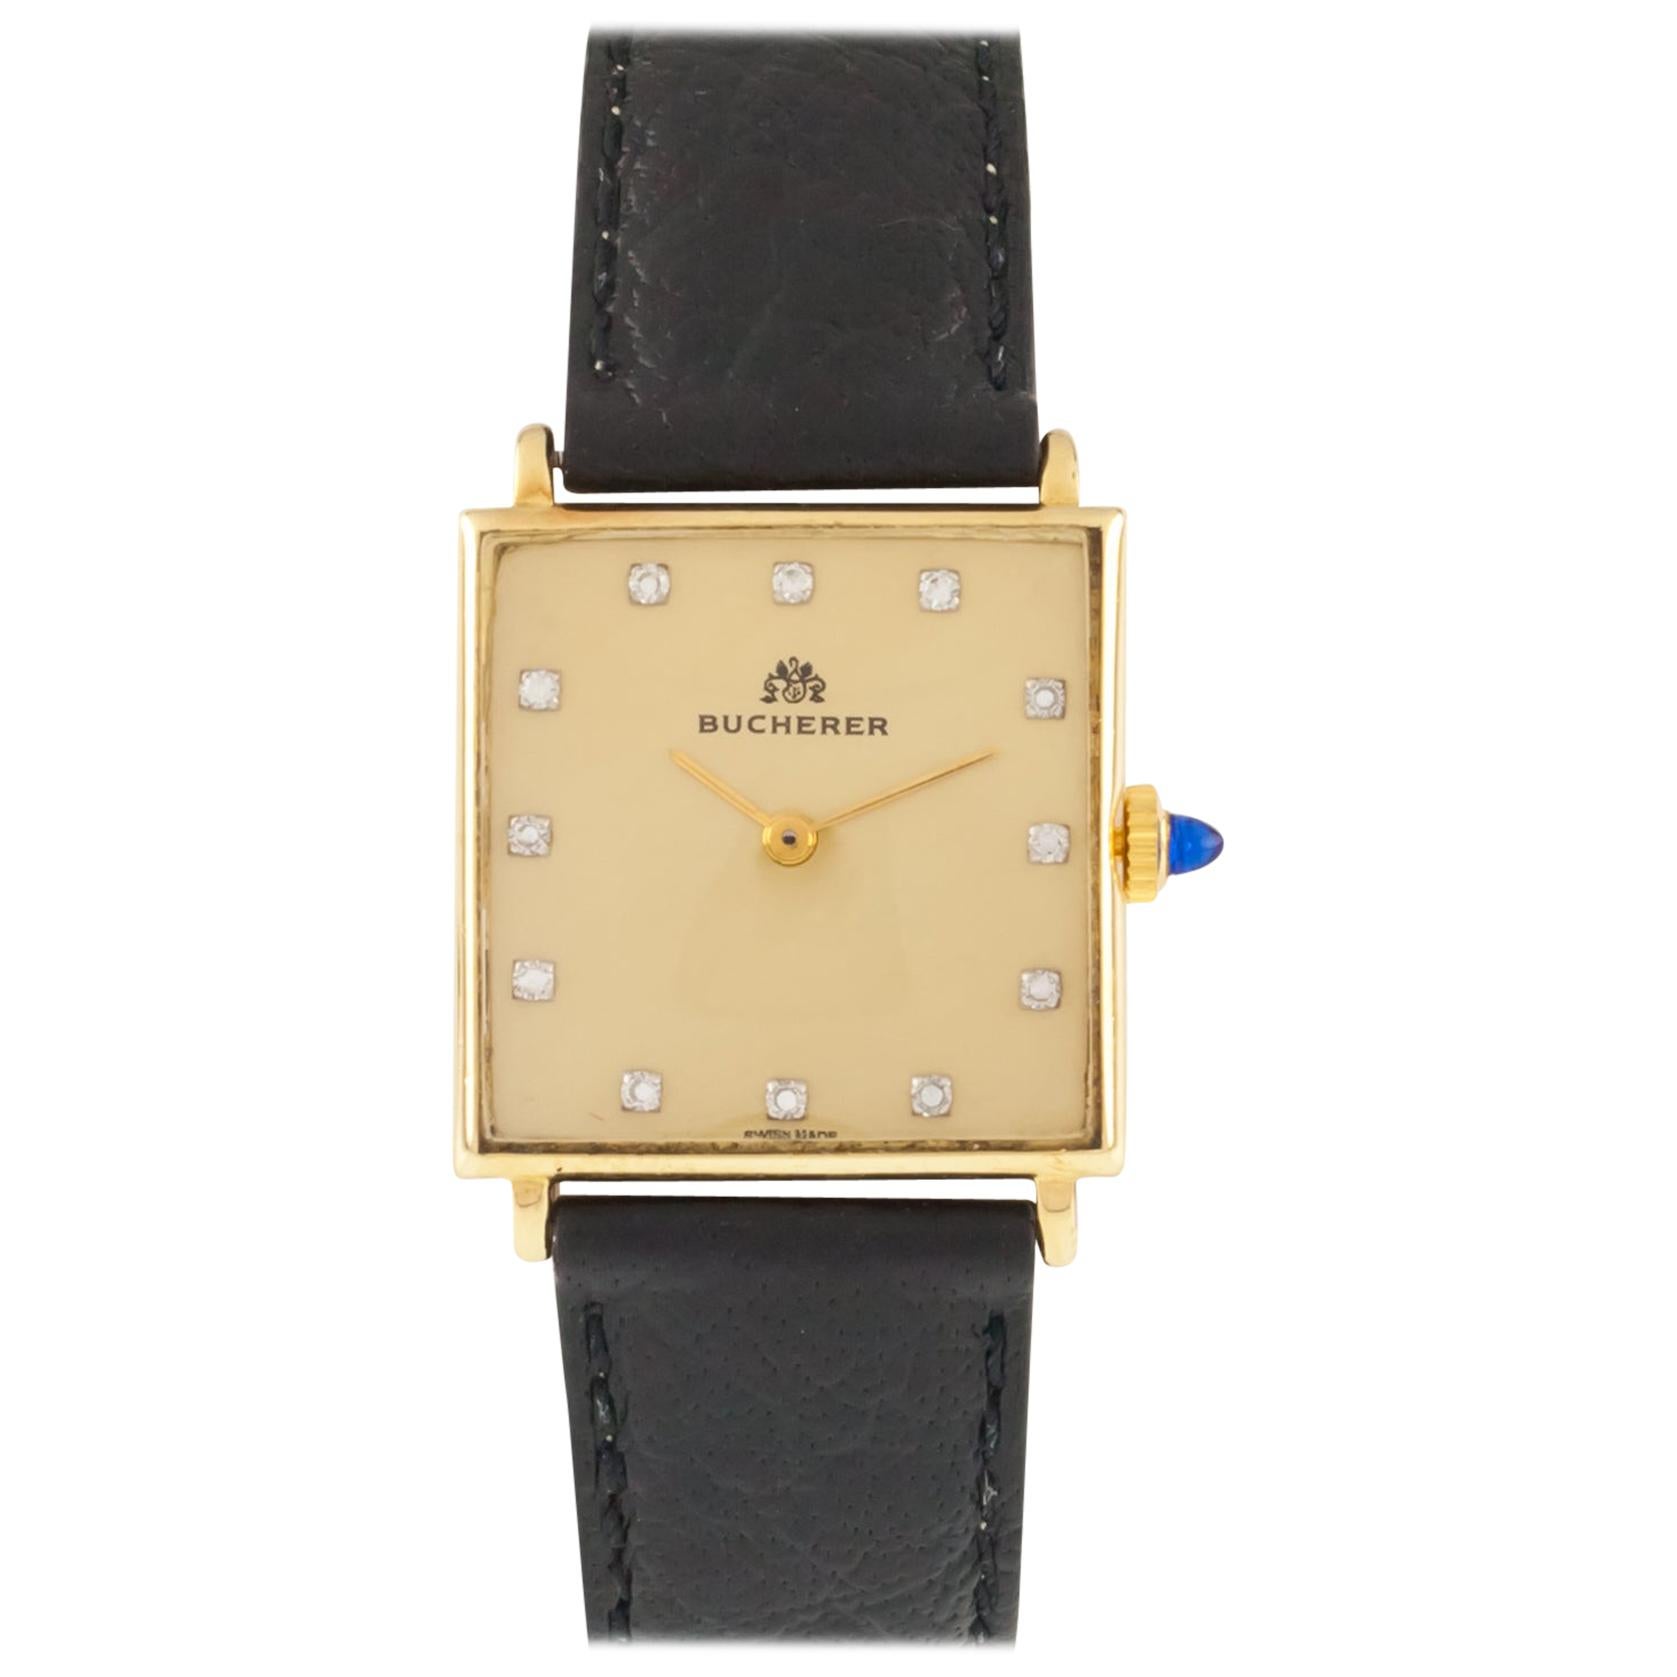 Bucherer 18k Gold Men's Hand-Winding Watch with Diamond Dial and Leather Band